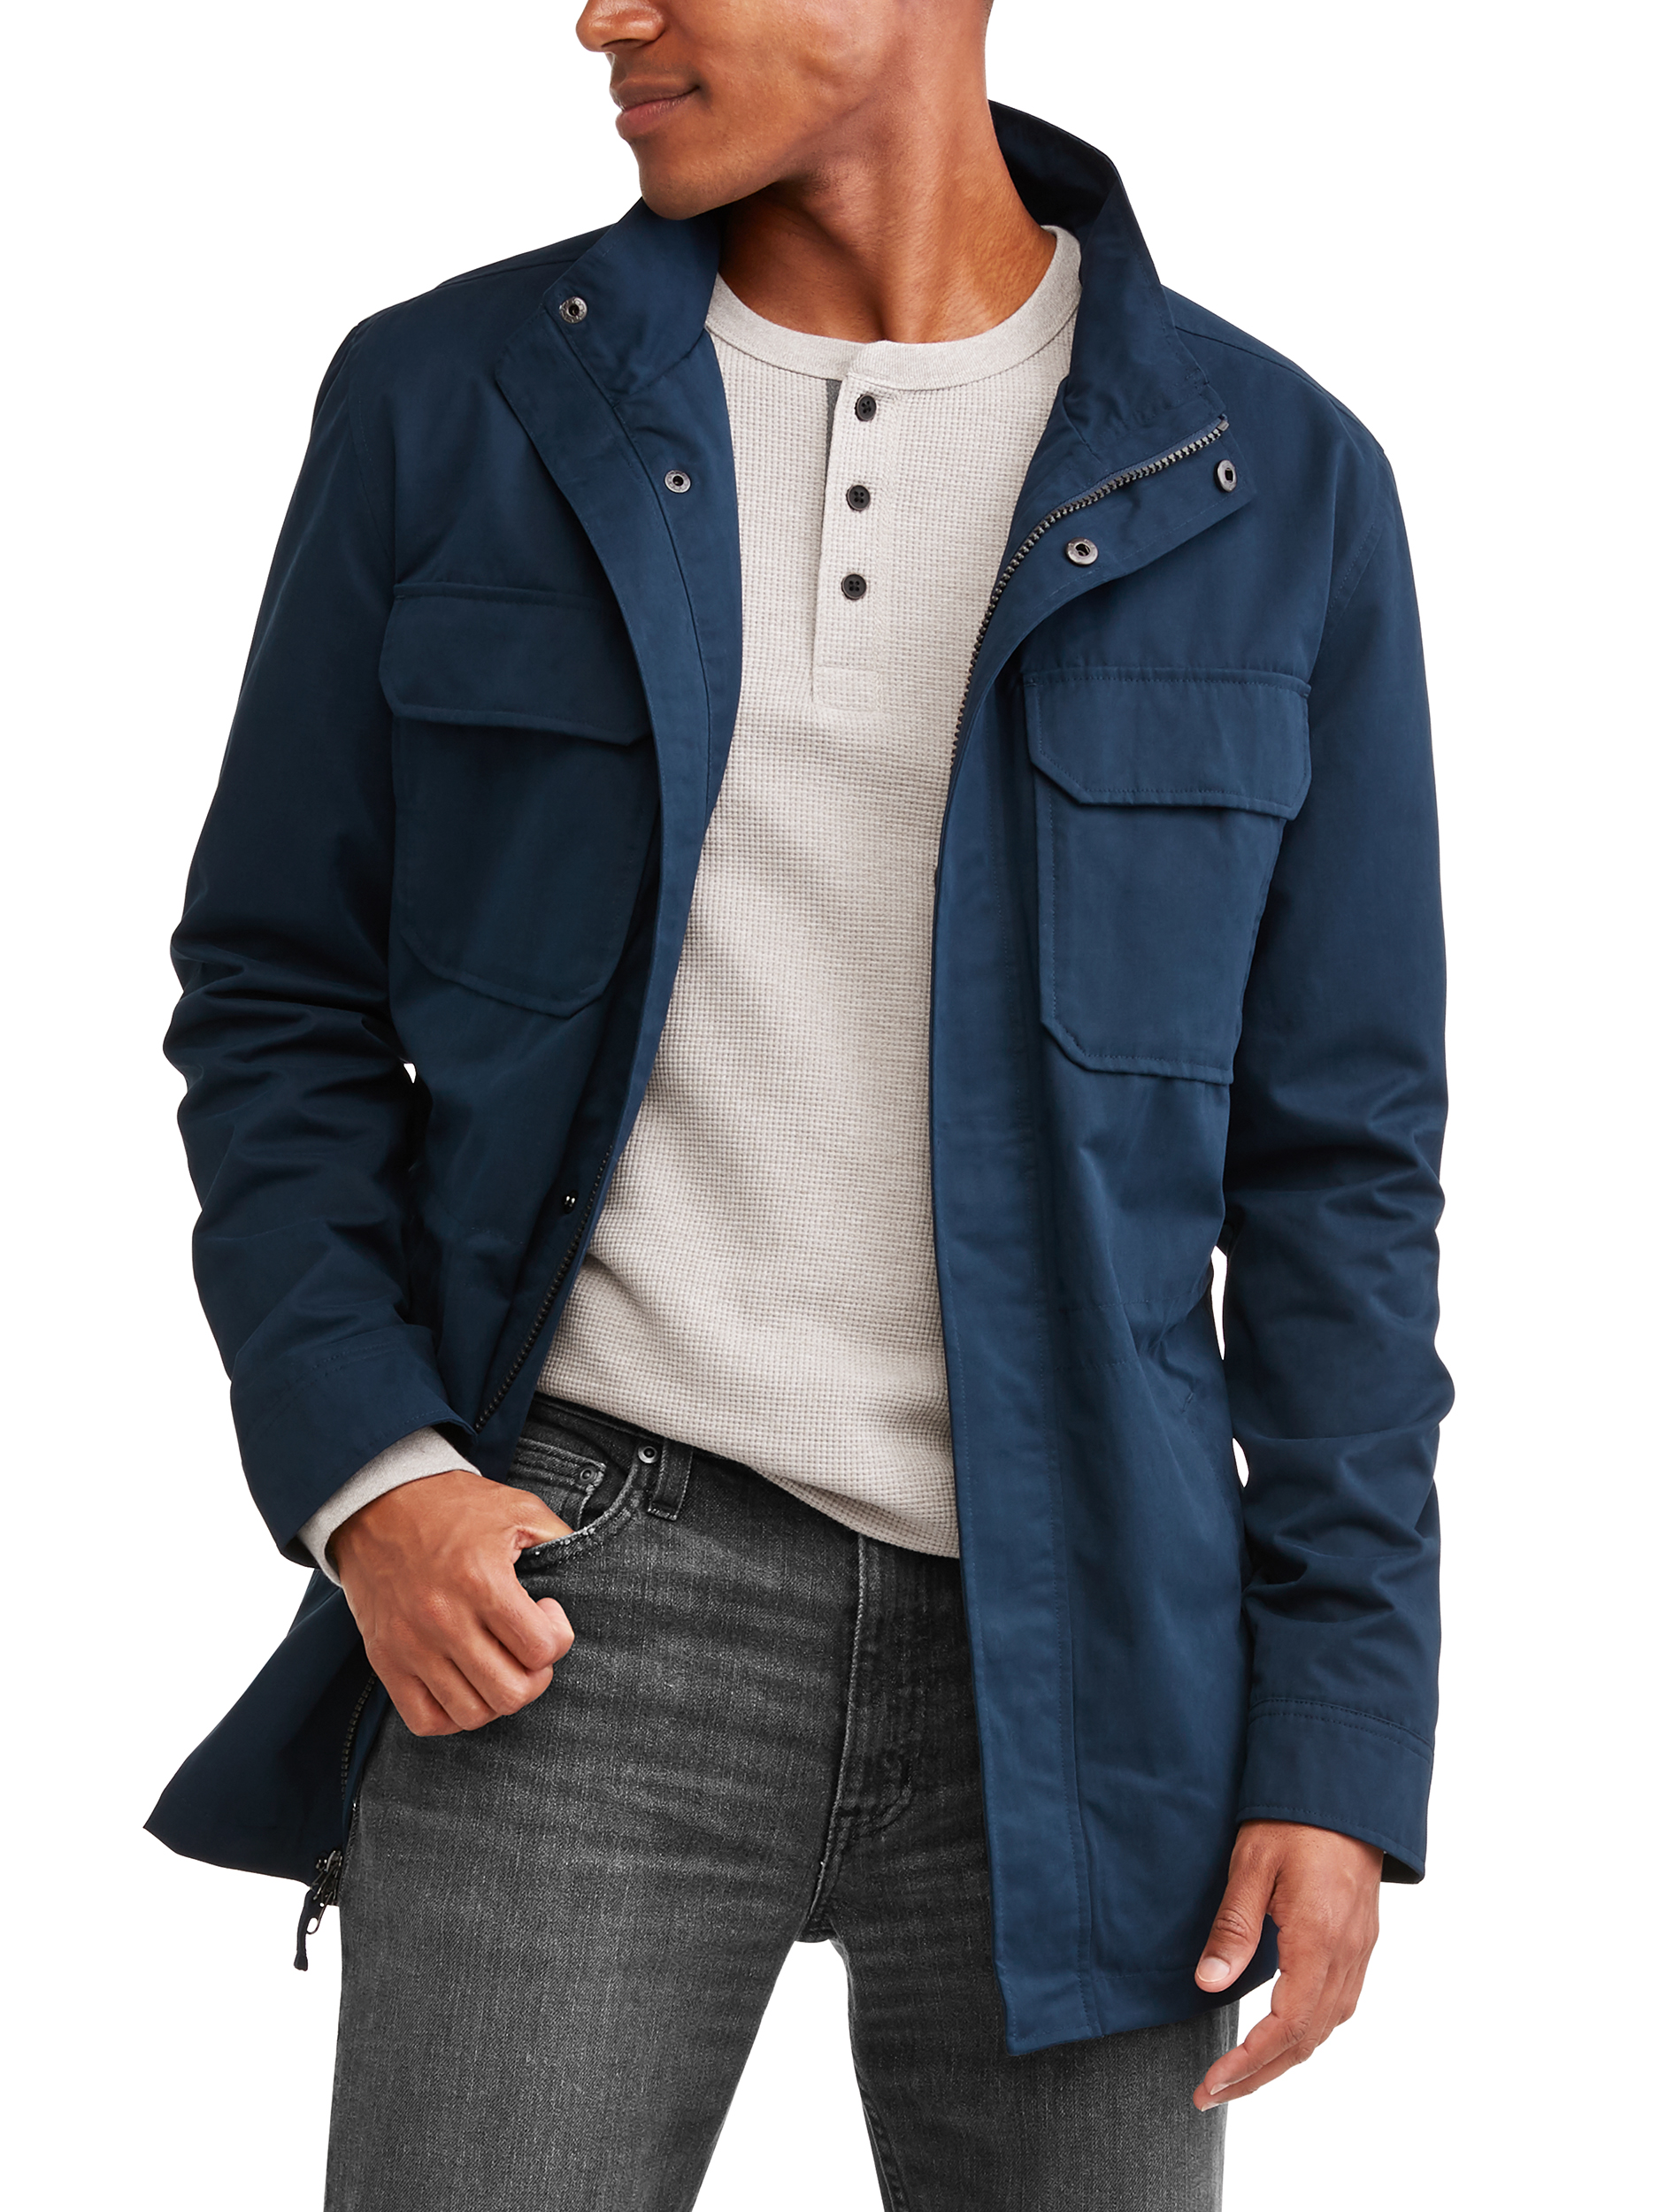 George Men's field jacket up to size 5xl - image 3 of 5